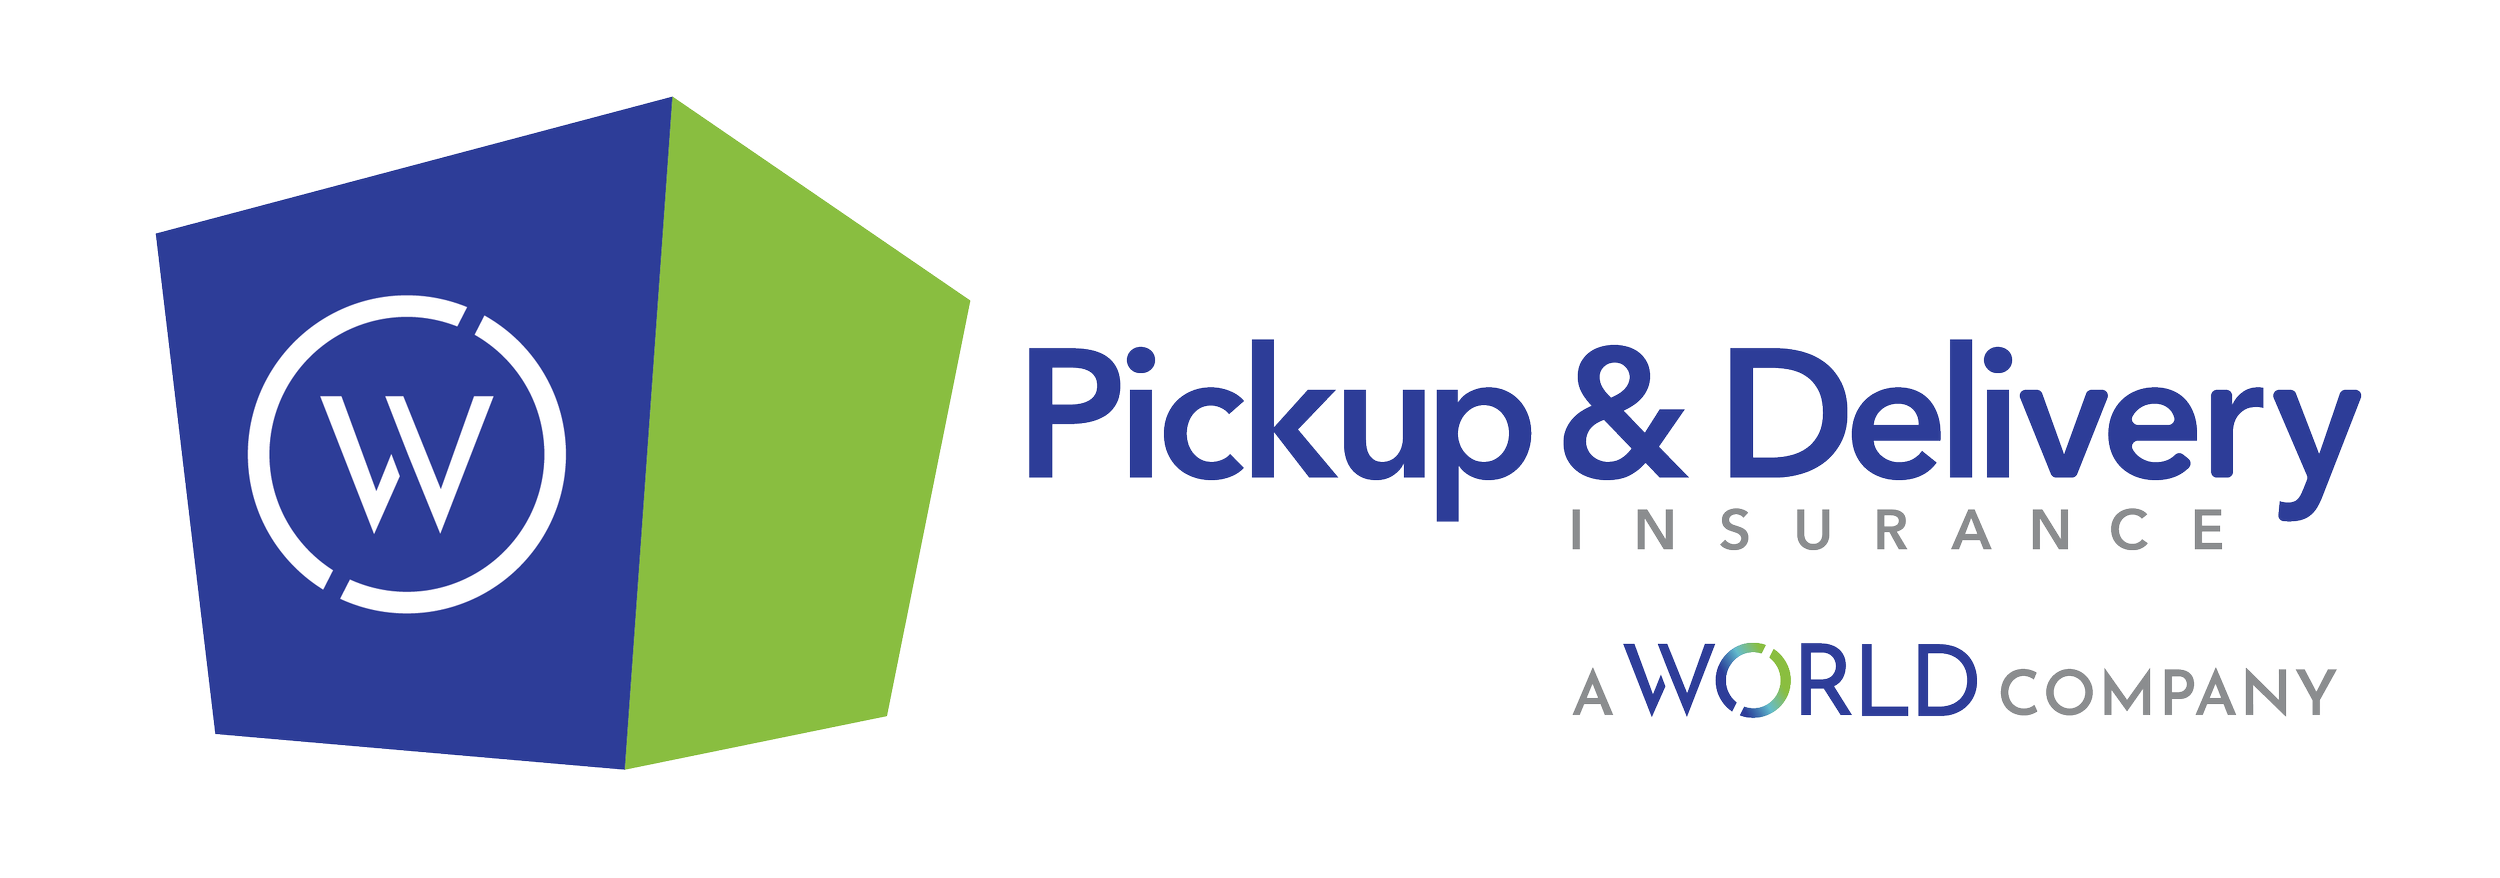 Pickup &amp; Delivery Insurance